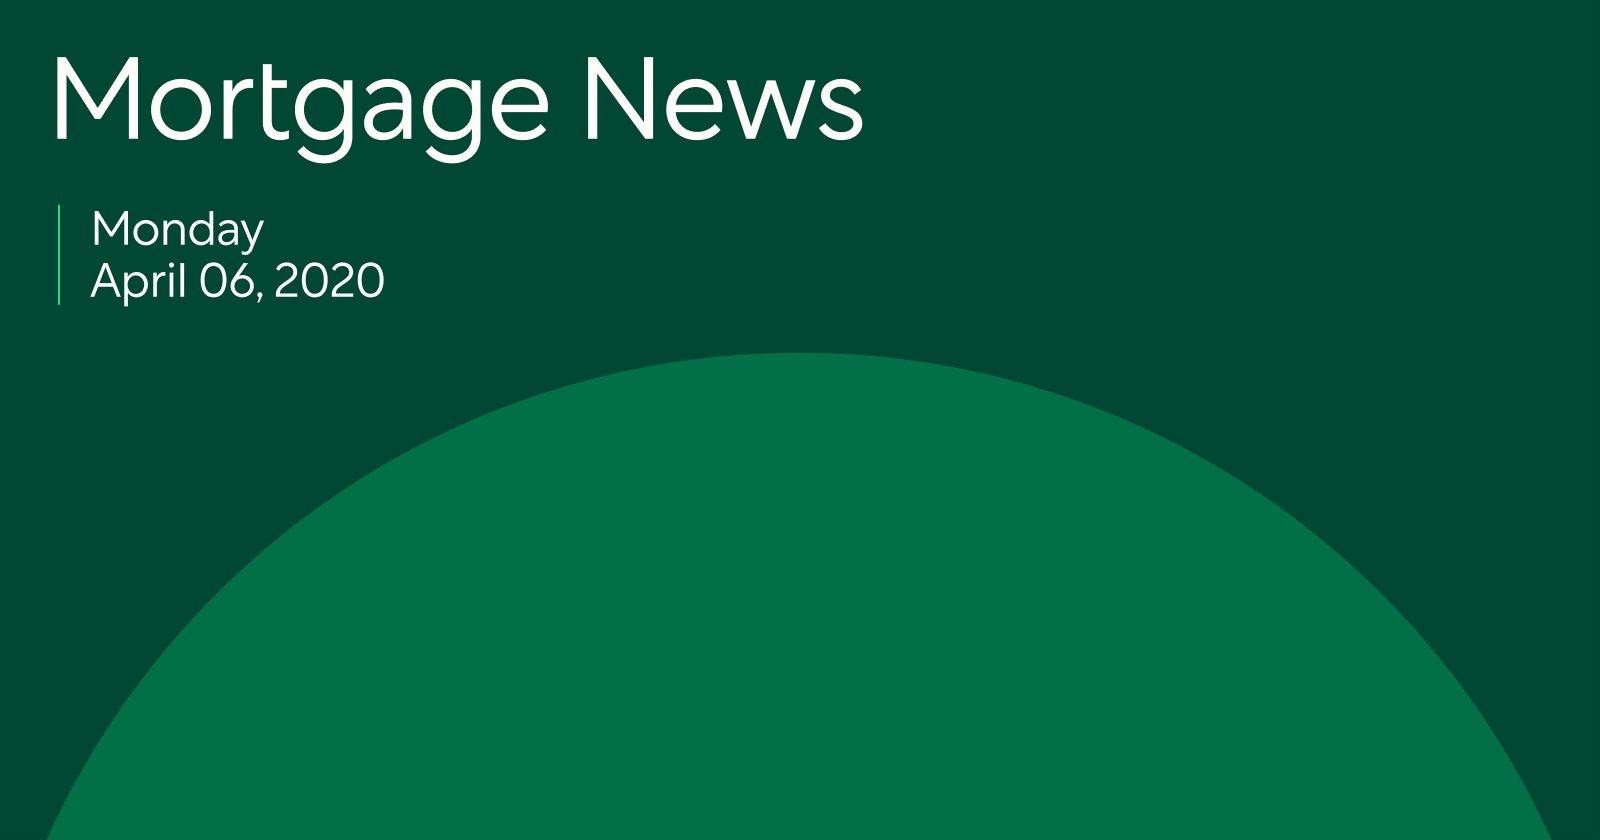  Mortgage News: Published by Better April 6, 2020